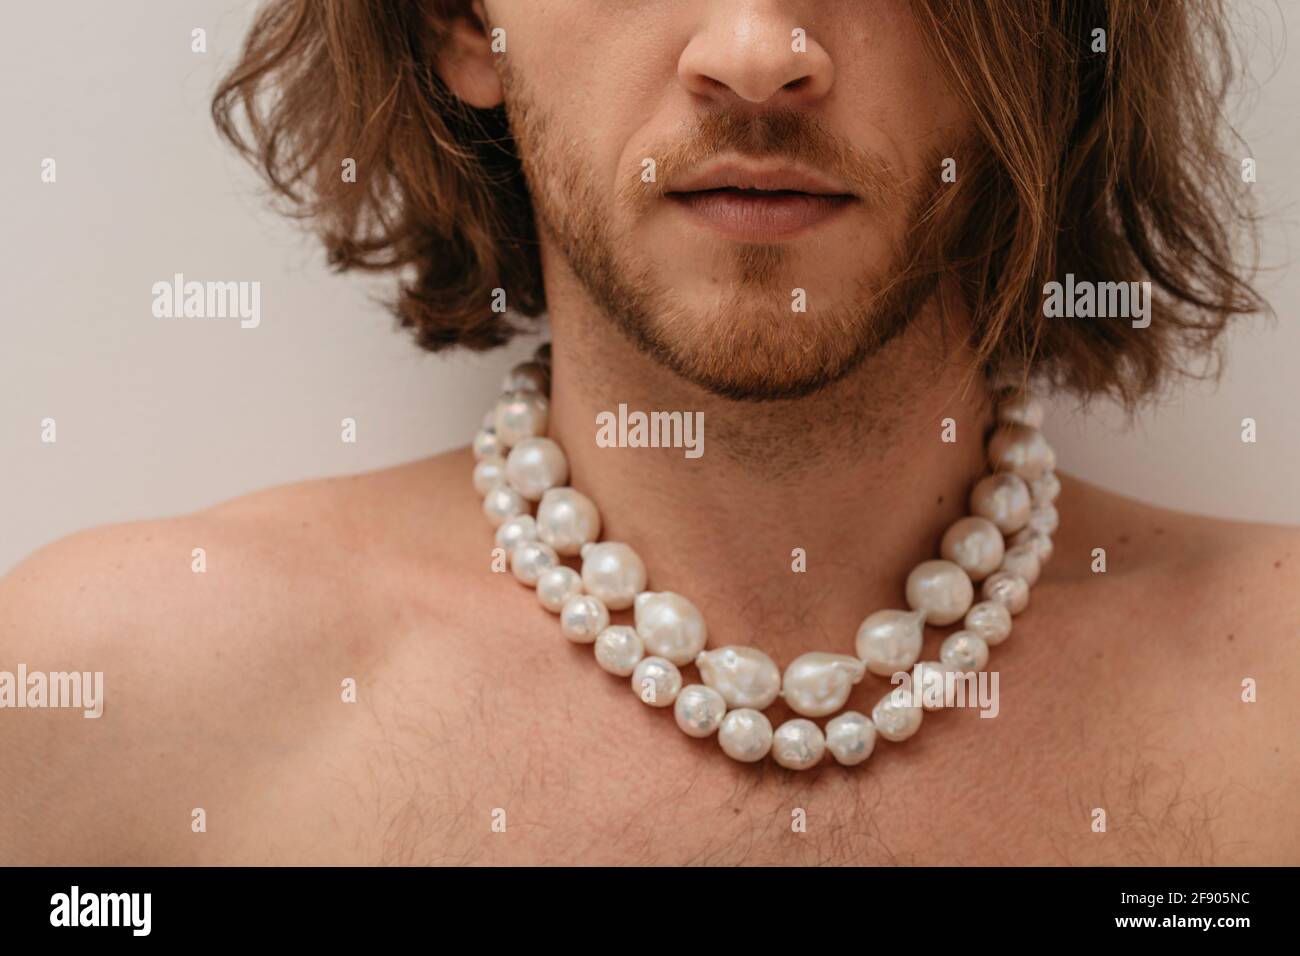 Portrait of a handsome shirtless man wearing pearl necklaces Stock Photo